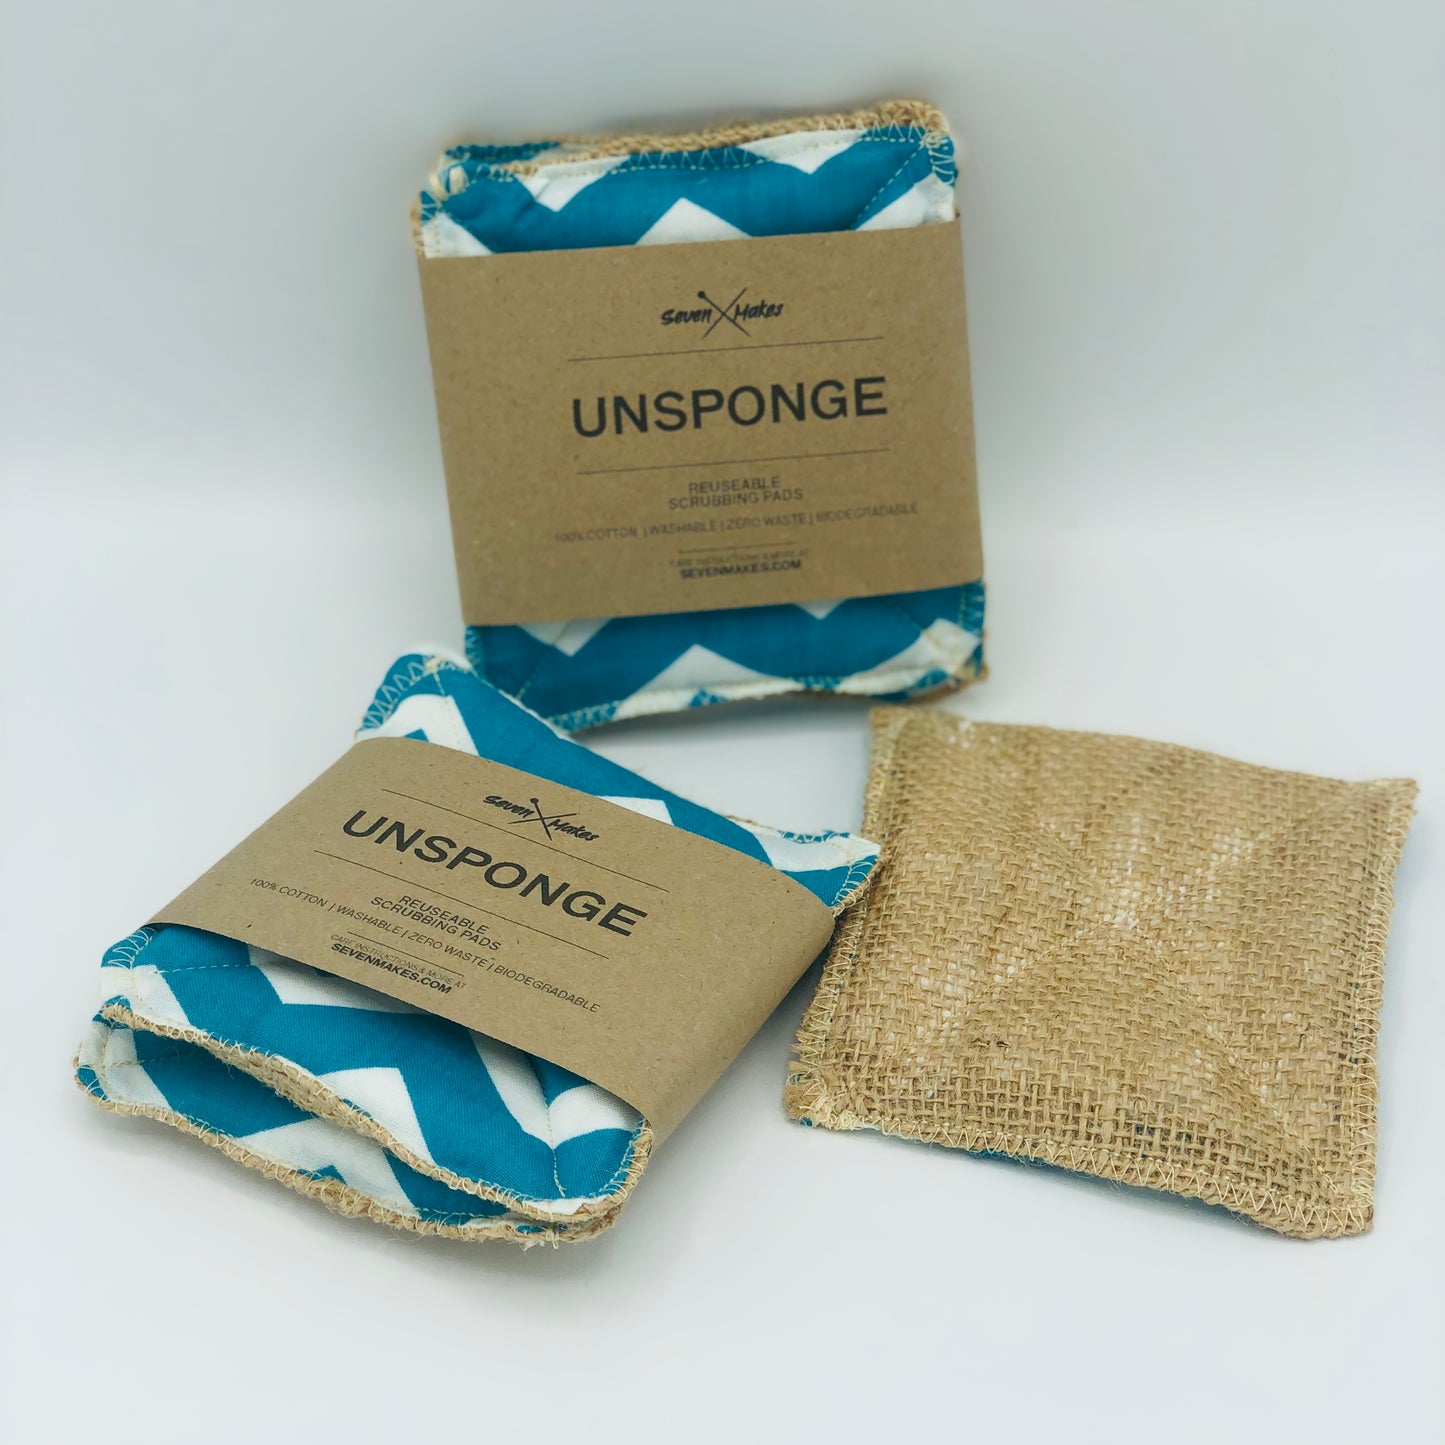 UnSponges - Wee Biodegradable Scrubbers for Pots and Pans, Surfaces and Stuff!